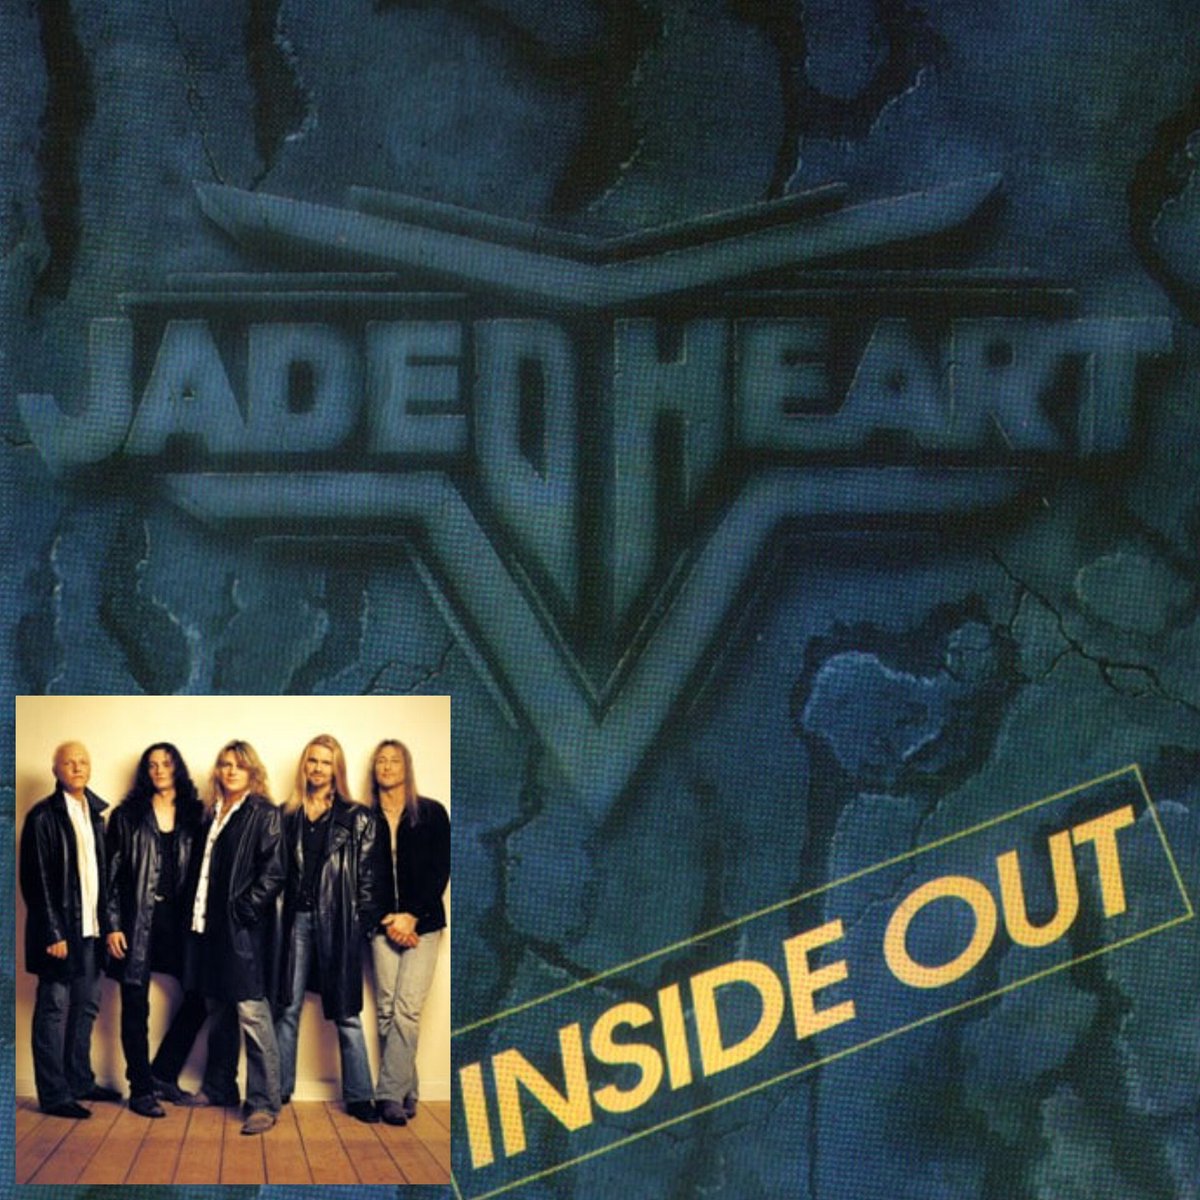 JADED HEART 🤘🔥
🎶“Inside Out” (1994)🎶
(Official Audio) ROCK ON! 🤟🏽
When you come across a  masterpiece in music, you know it. Do you agree? #JadedHeart #MichaelBormann #InsideOut #Masterpiece #ShowTheTalent #RockOn #HardRock #MelodicRock
Listen here: 👉 youtu.be/1U3_RK6vNvI